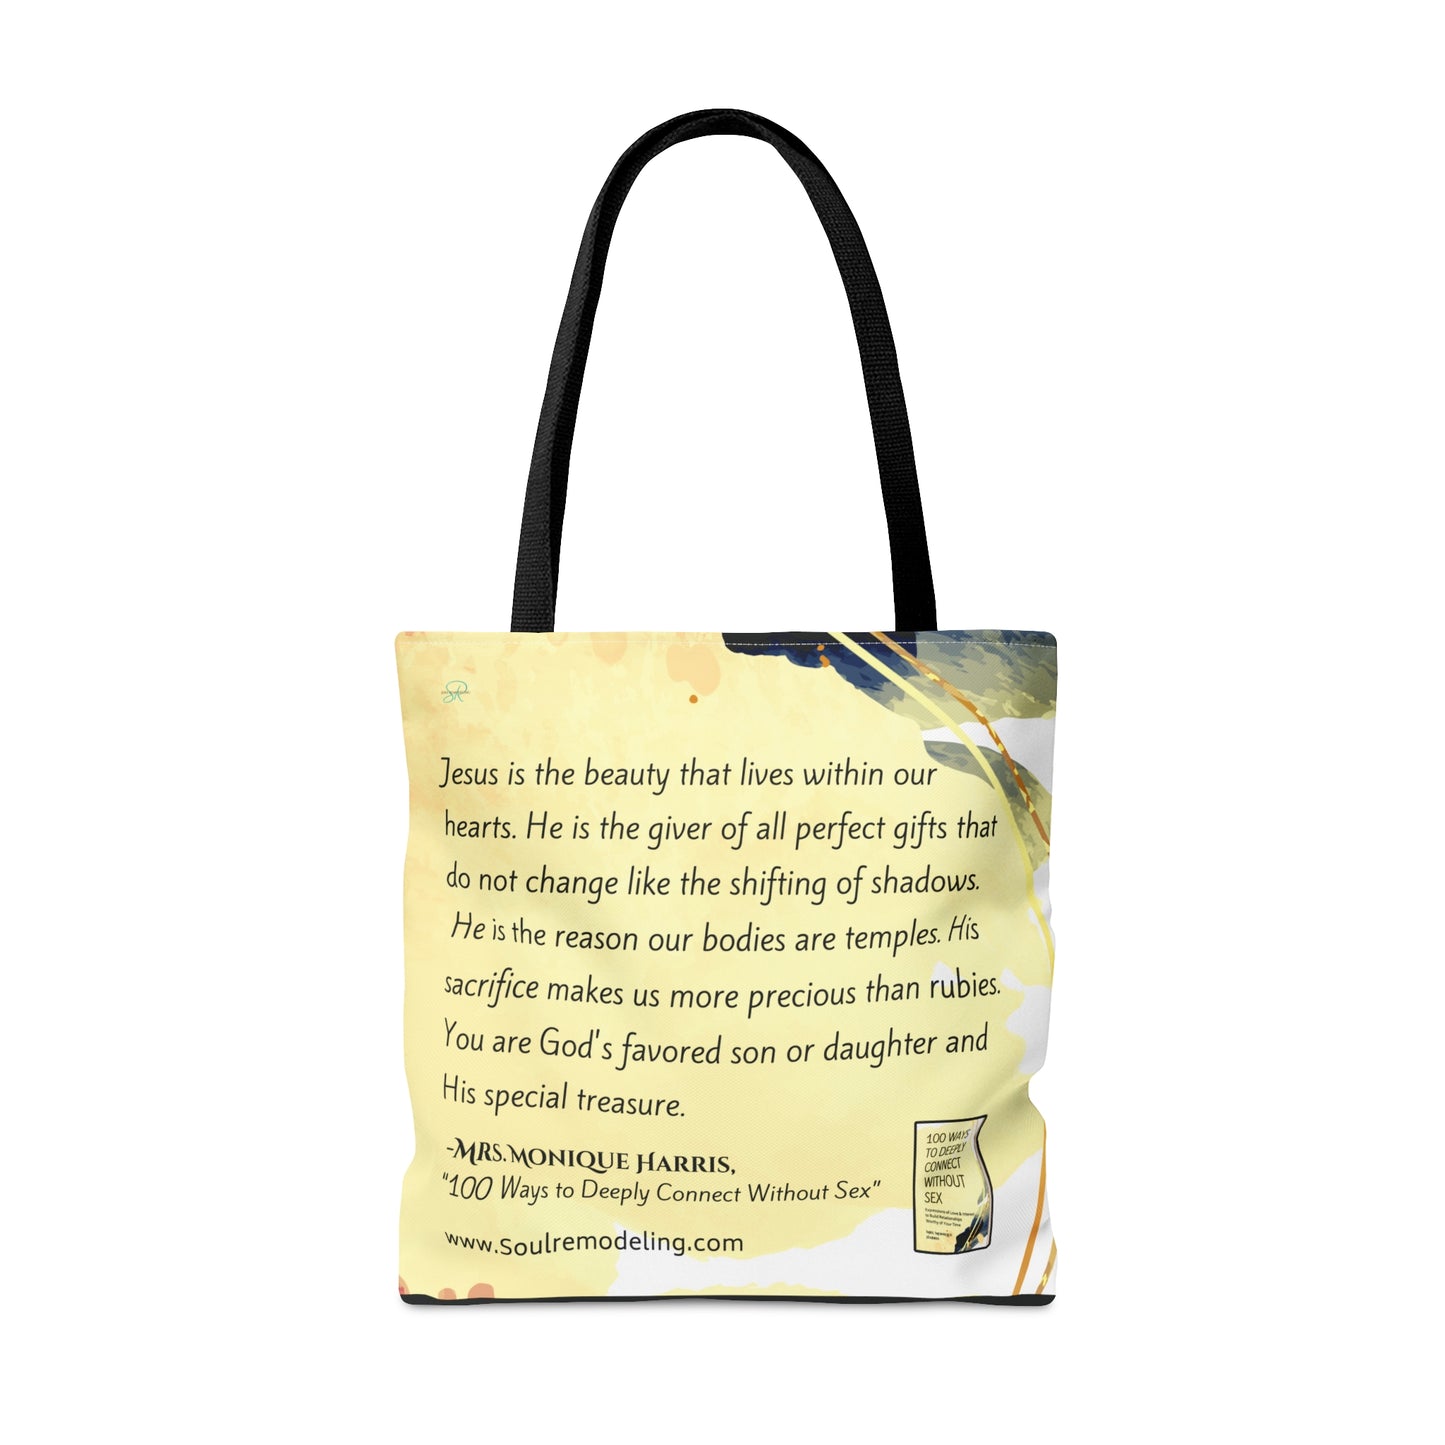 “100 Ways to Deeply Connect Without Sex” Tote Bag